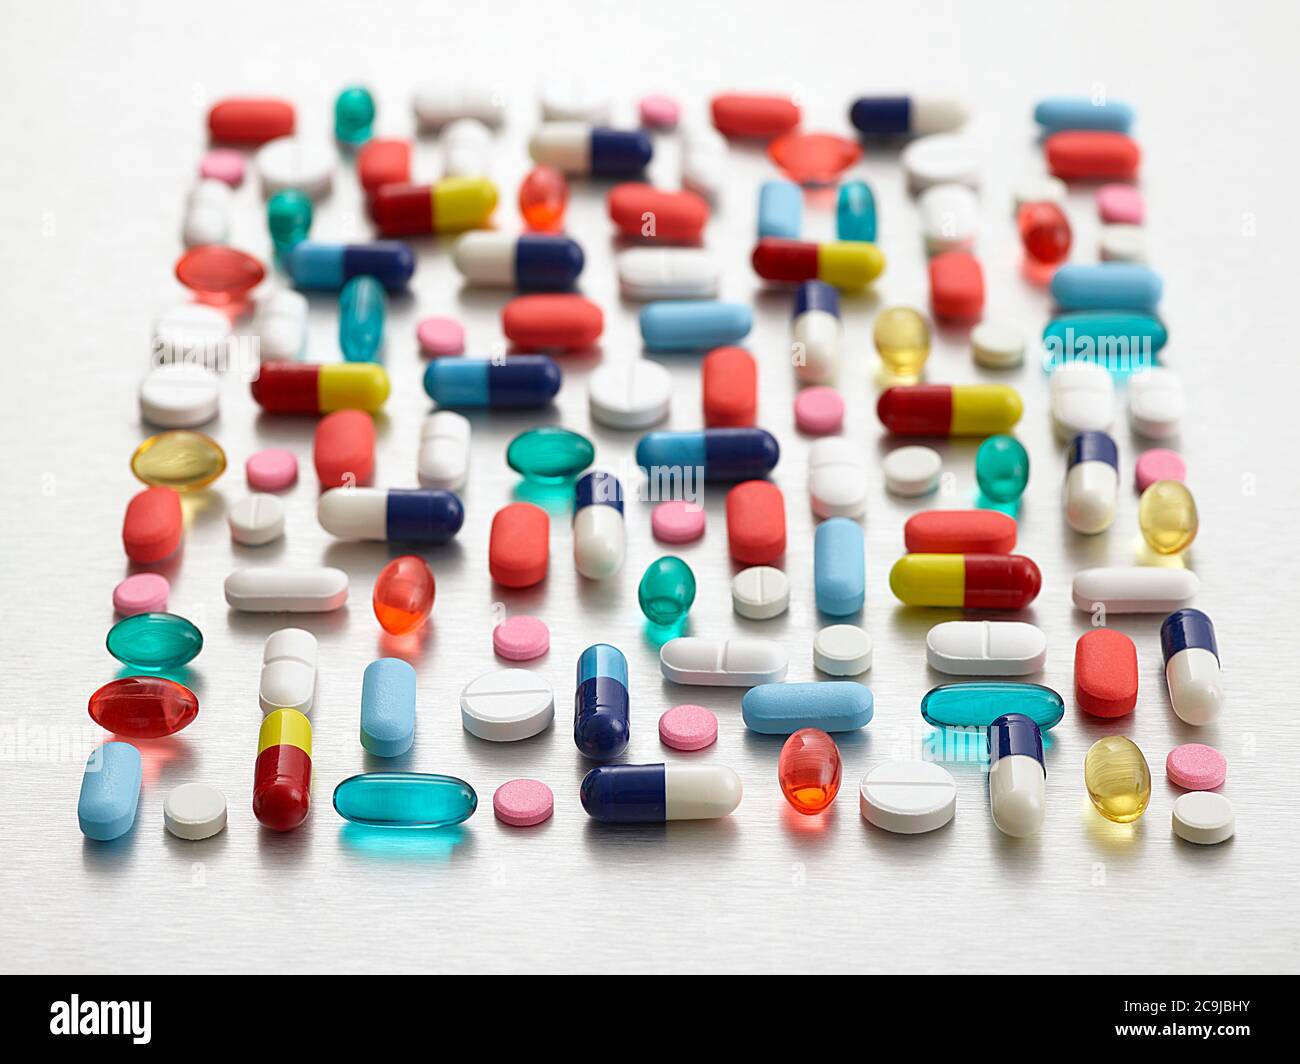 Pills and capsules against a white background. Stock Photo